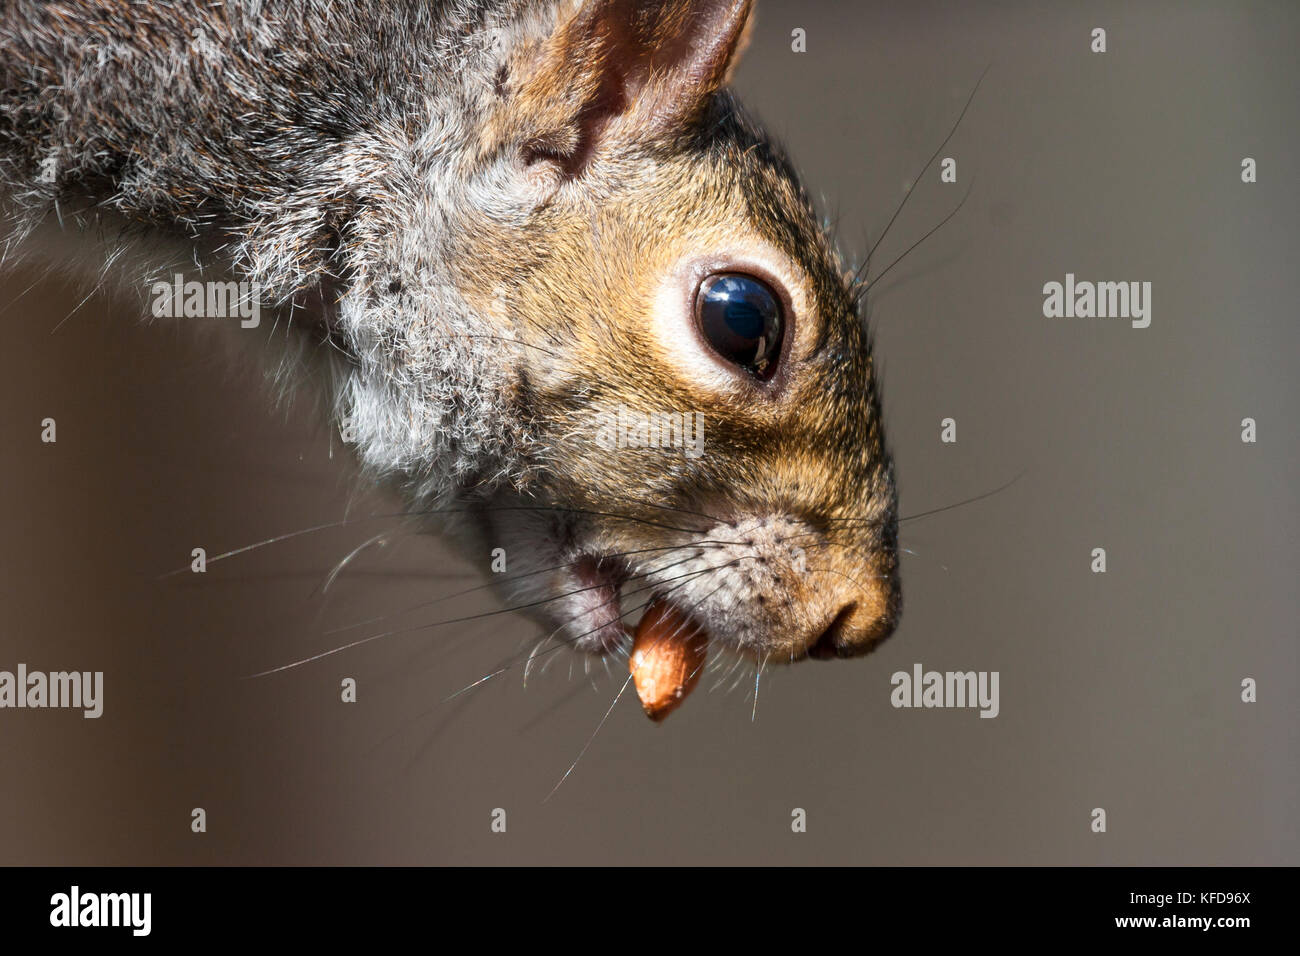 grey squirrel close up of head and whiskers with peanut in mouth. isolated background Stock Photo